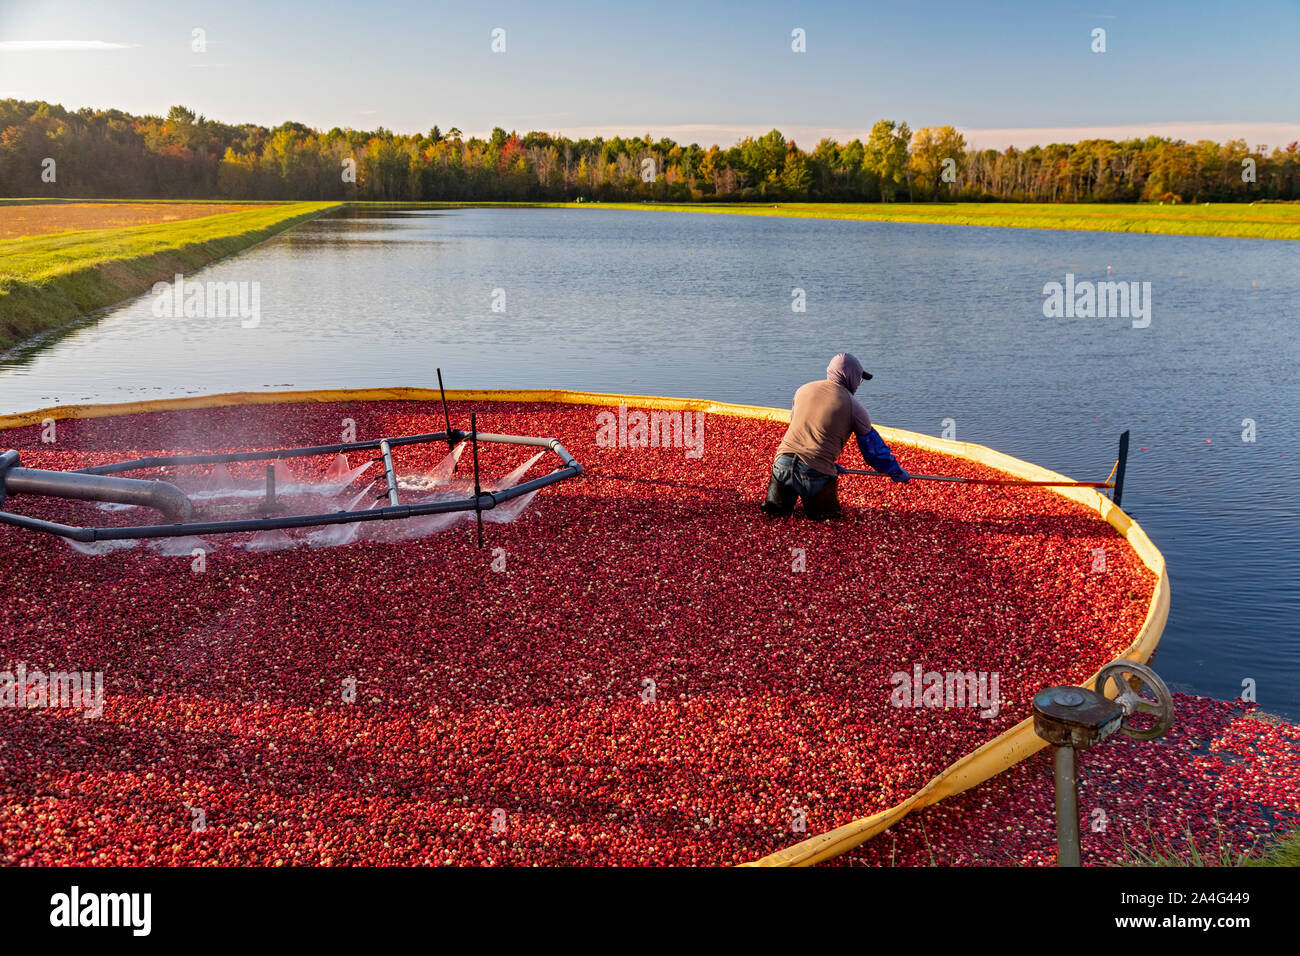 South Haven, Michigan - Workers harvest cranberries at DeGRandchamp Farms. The cranberry bog is flooded allowing the floating fruit to be collected. Stock Photo